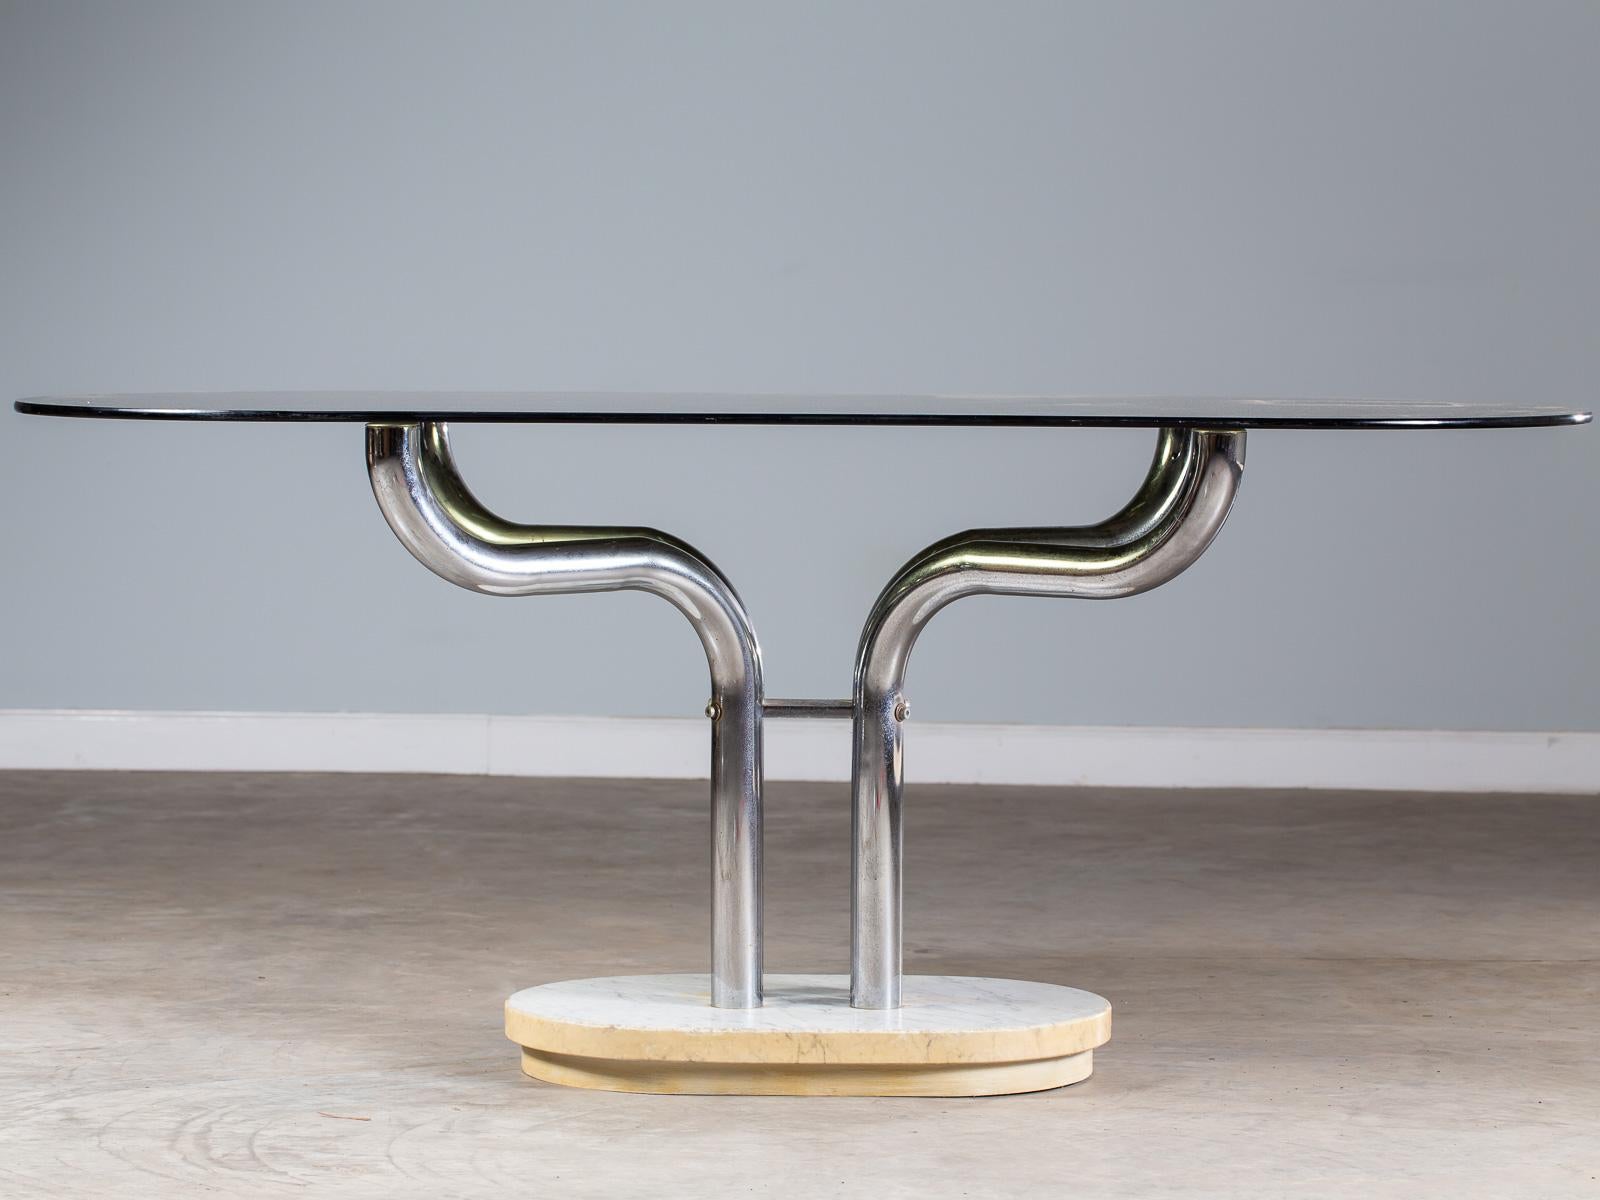 A fabulous period Italian vintage dining writing table circa 1970 having an oval marble base and four curved chrome metal legs supporting the original smoked glass racetrack shaped oval top. The sensuous curves of this Italian table are superb from